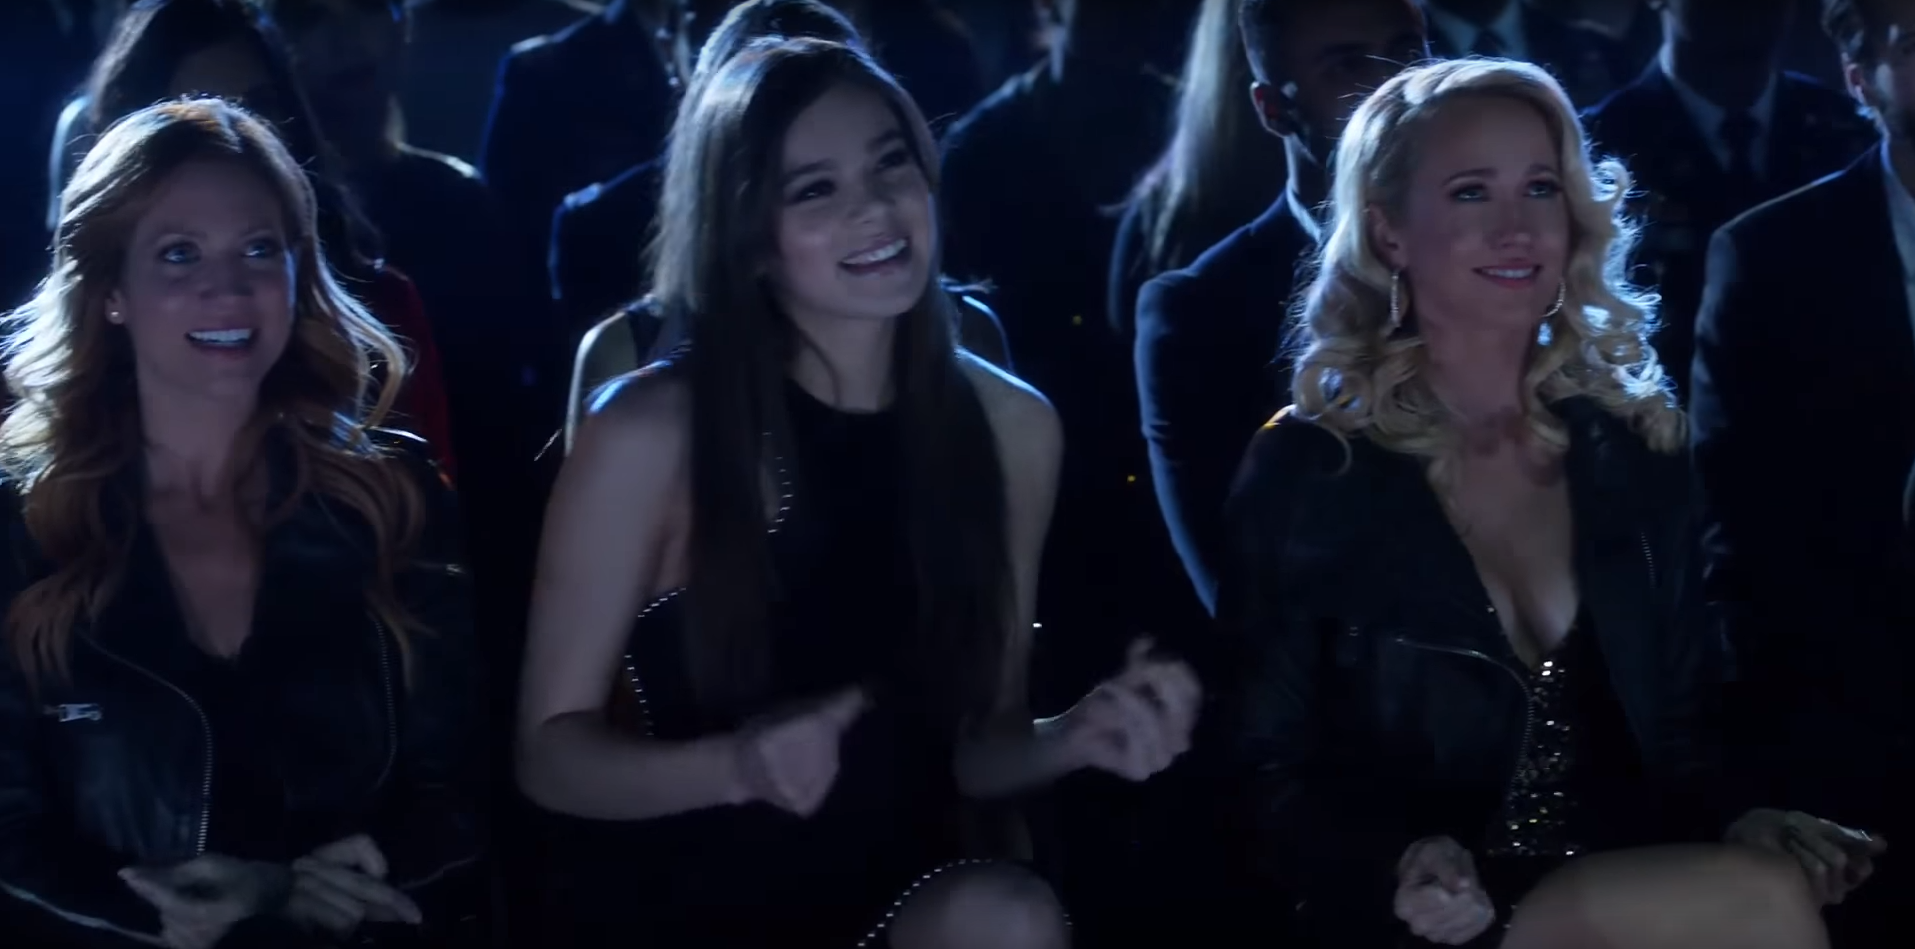 New Trailer for 'Pitch Perfect 3' Starring Anna Kendrick & Re...